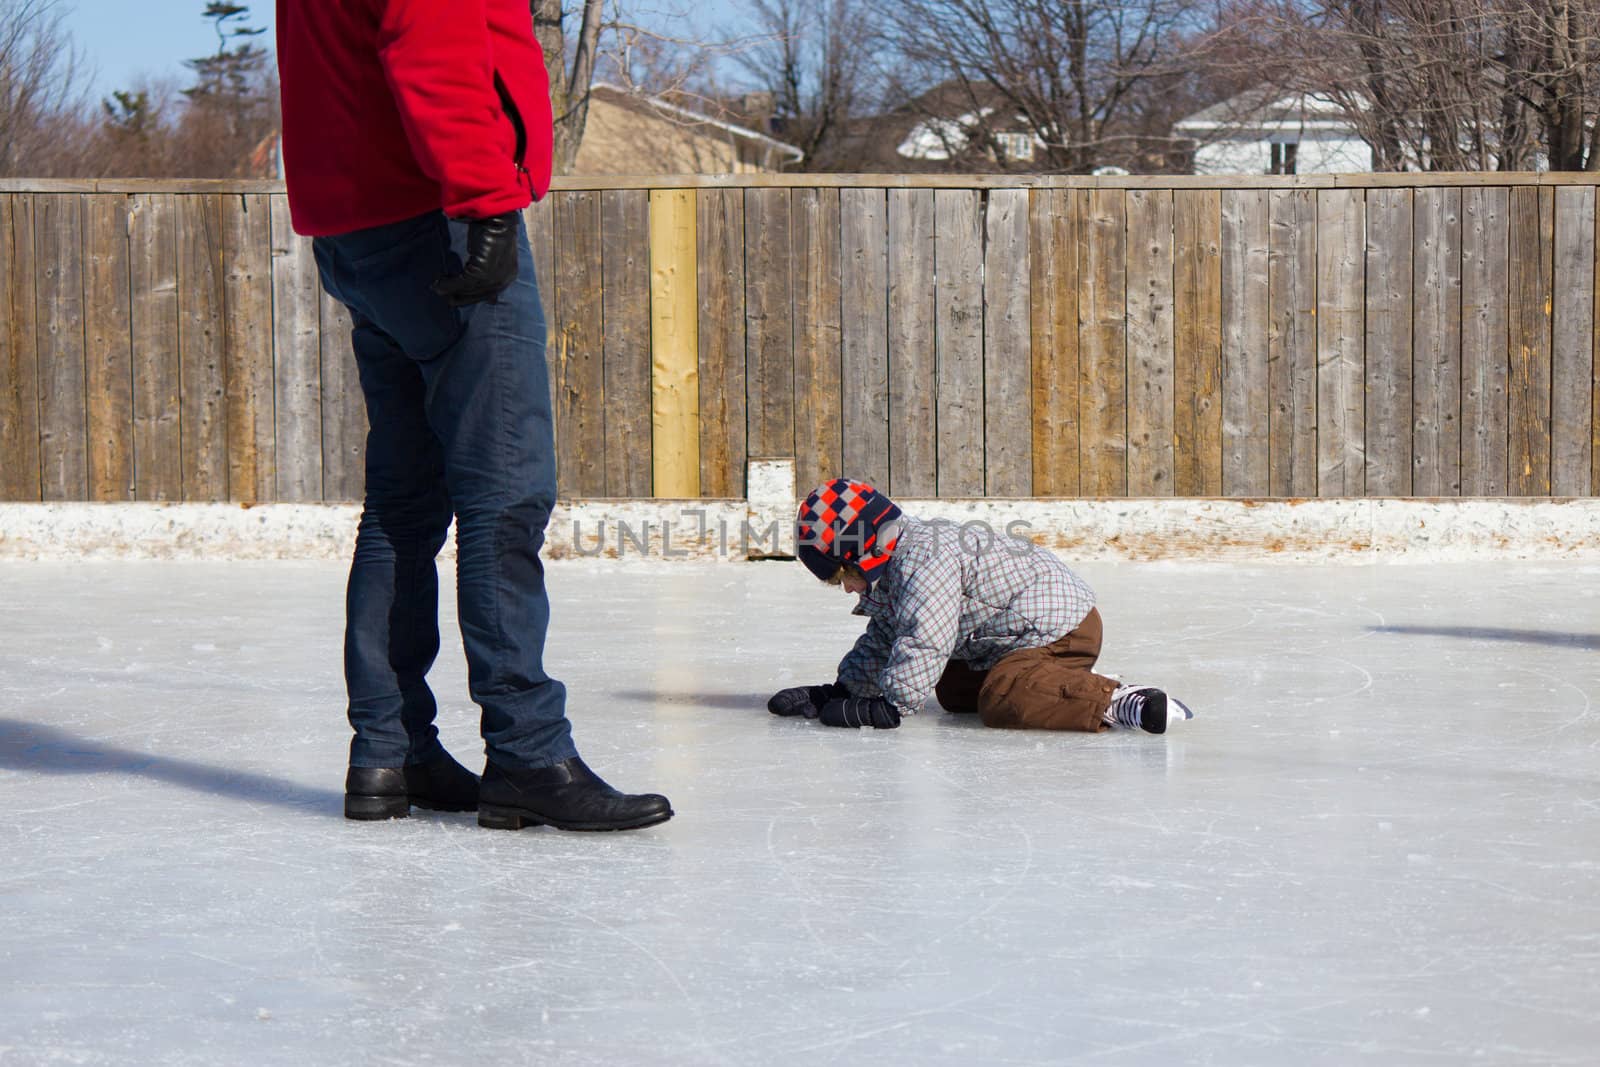 Father teaching son how to ice skate at an outdoor skating rink in winter.